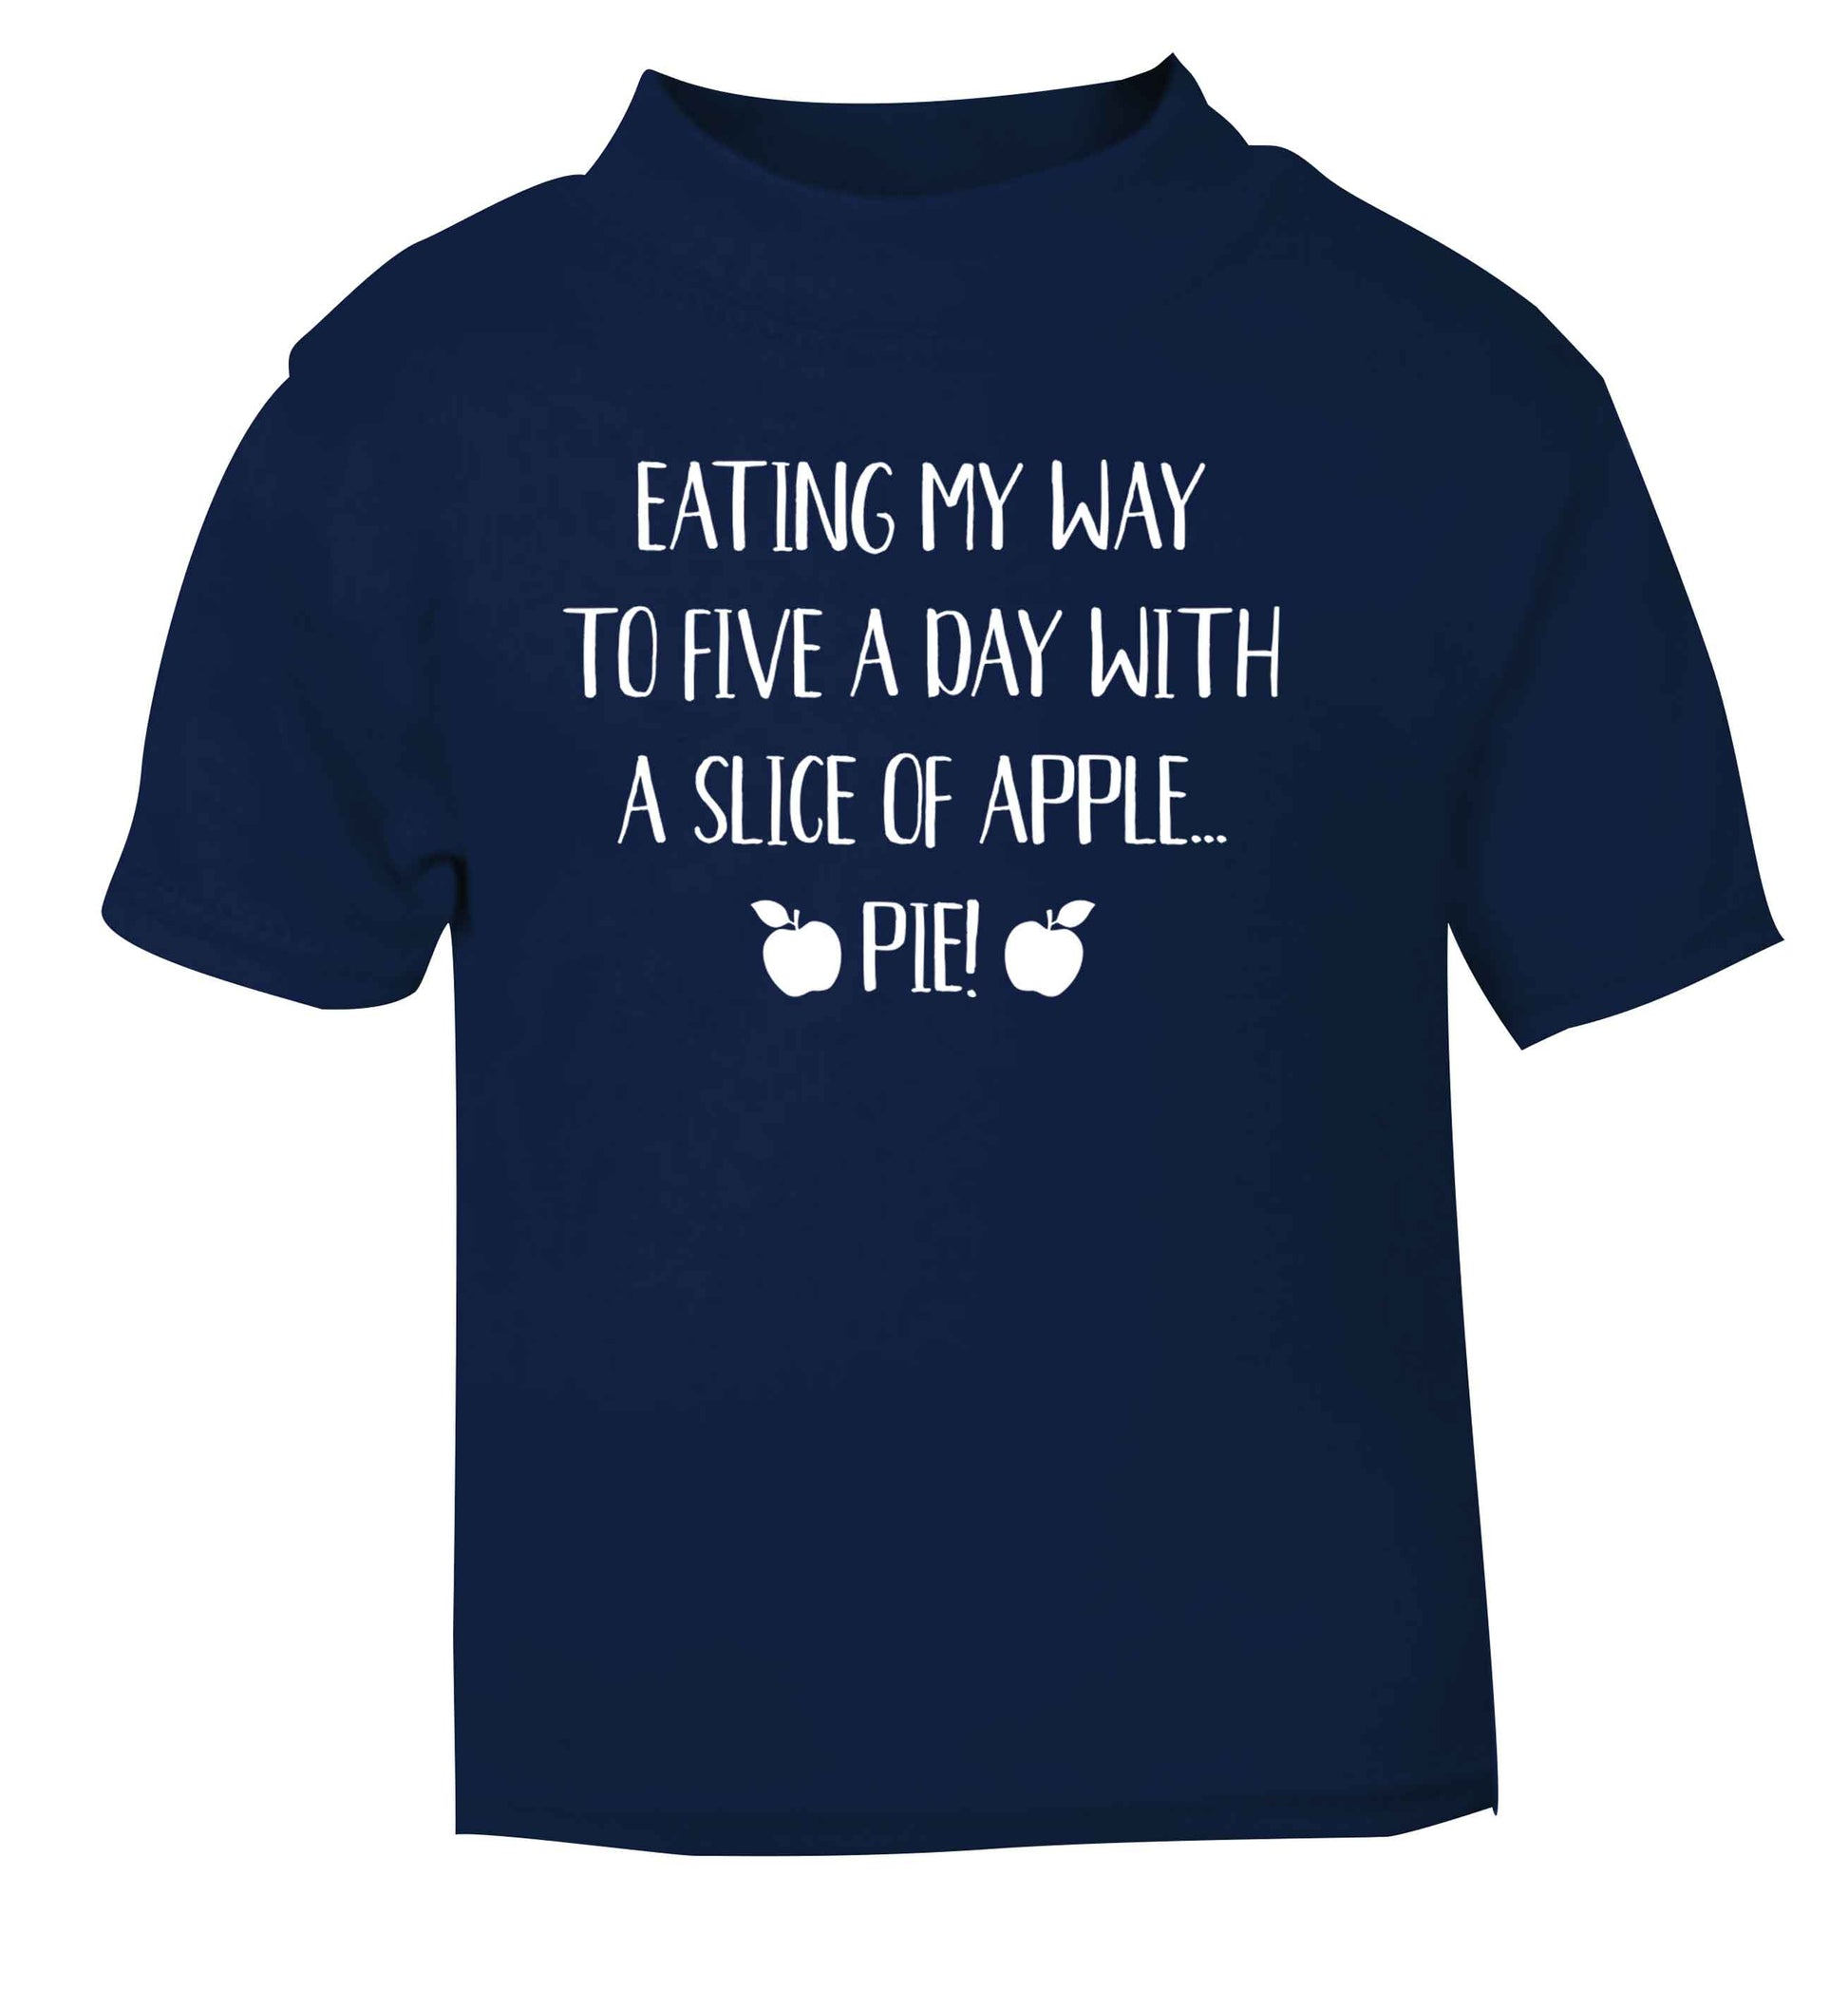 Eating my way to five a day with a slice of apple pie navy Baby Toddler Tshirt 2 Years